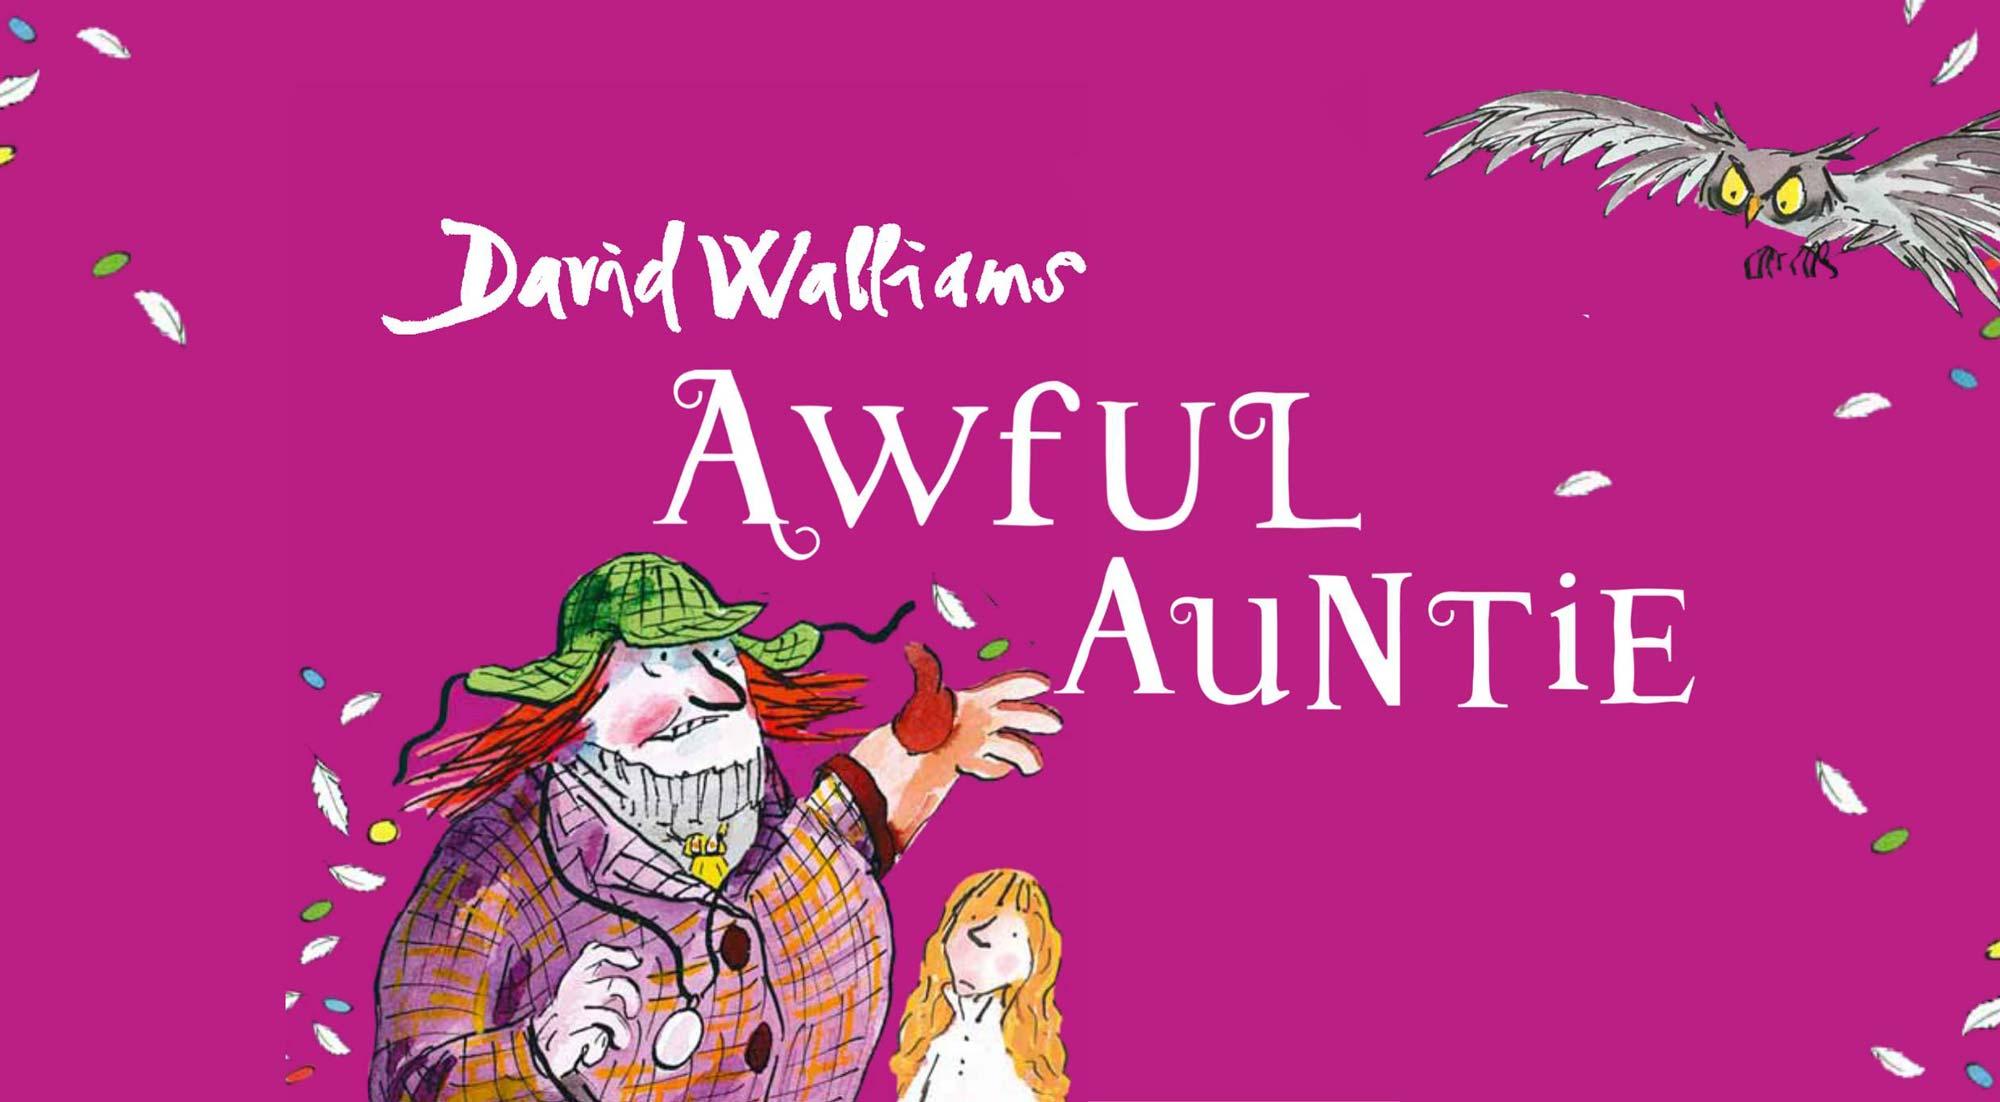 Outdoor Theatre: David Walliams’ Awful Auntie